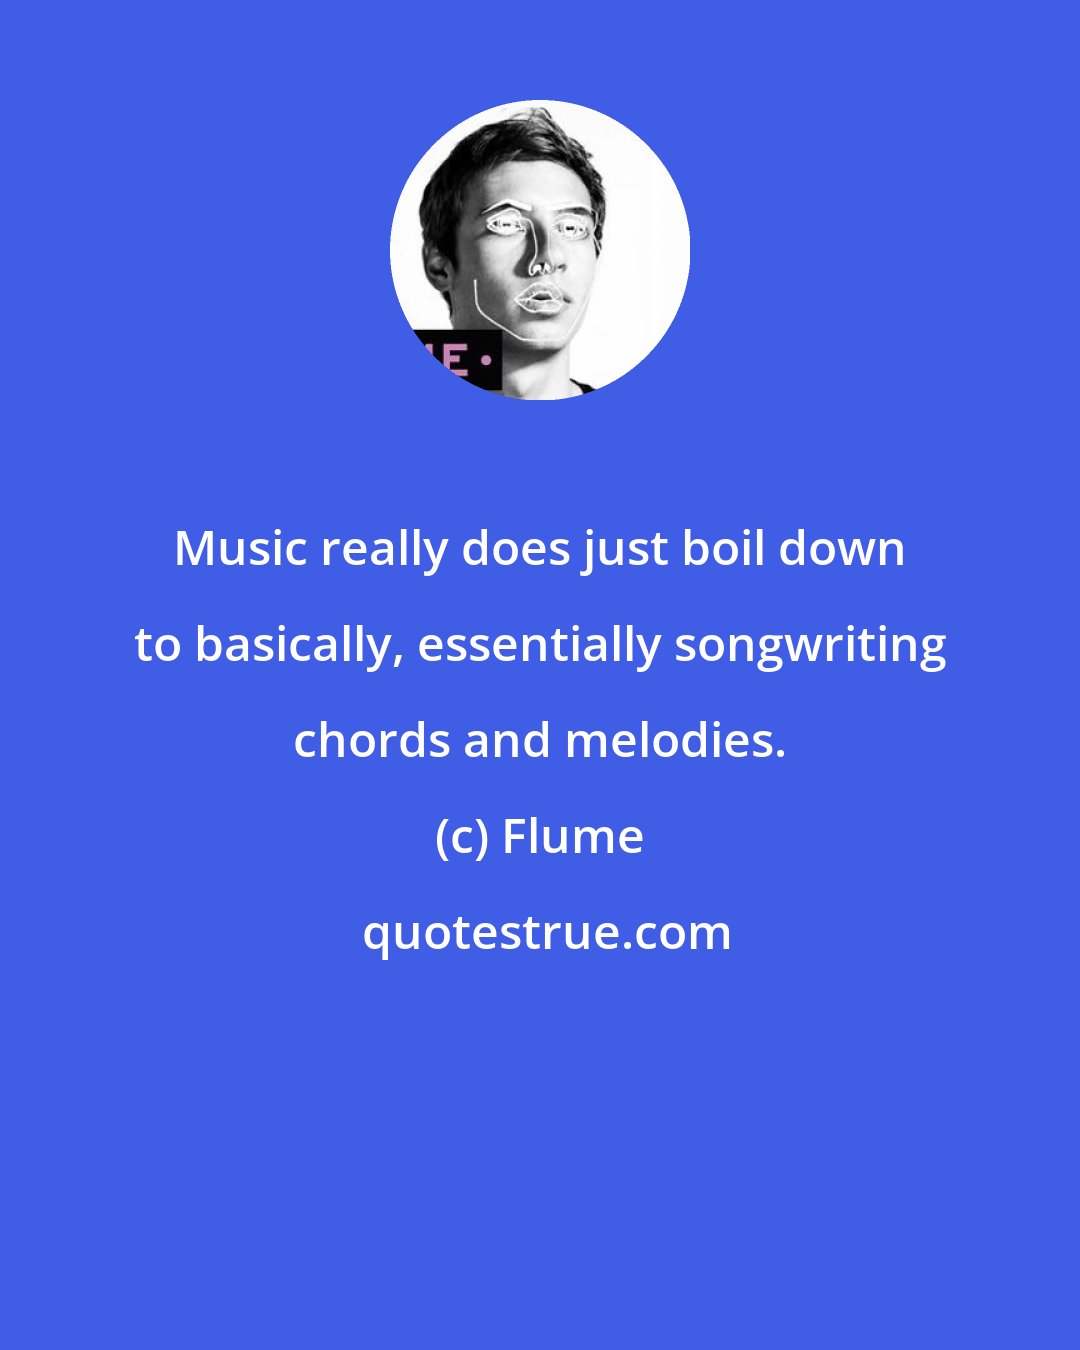 Flume: Music really does just boil down to basically, essentially songwriting chords and melodies.